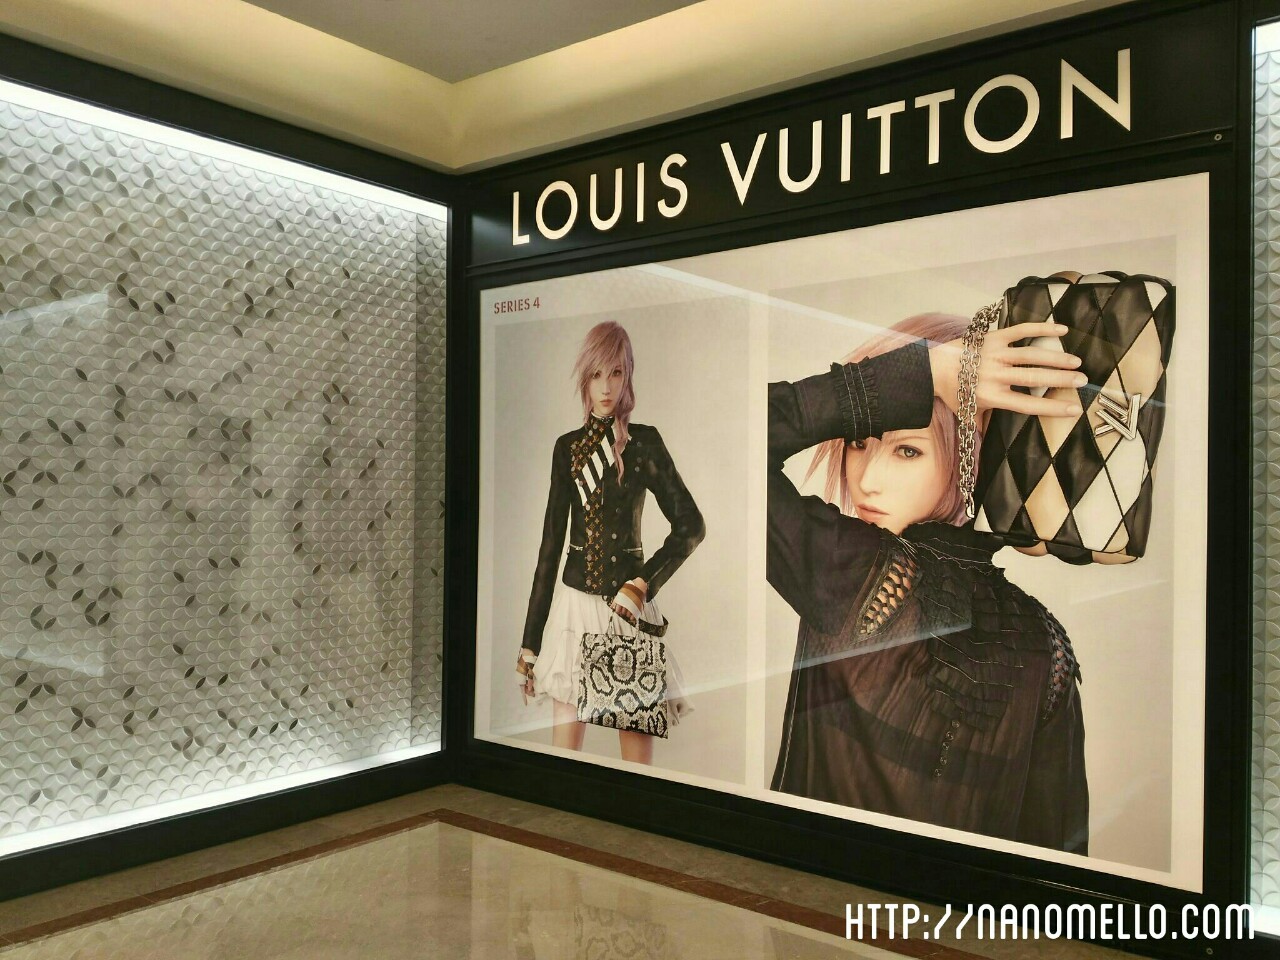 Final Fantasy Character Featured In New Louis Vuitton Fashion Ad